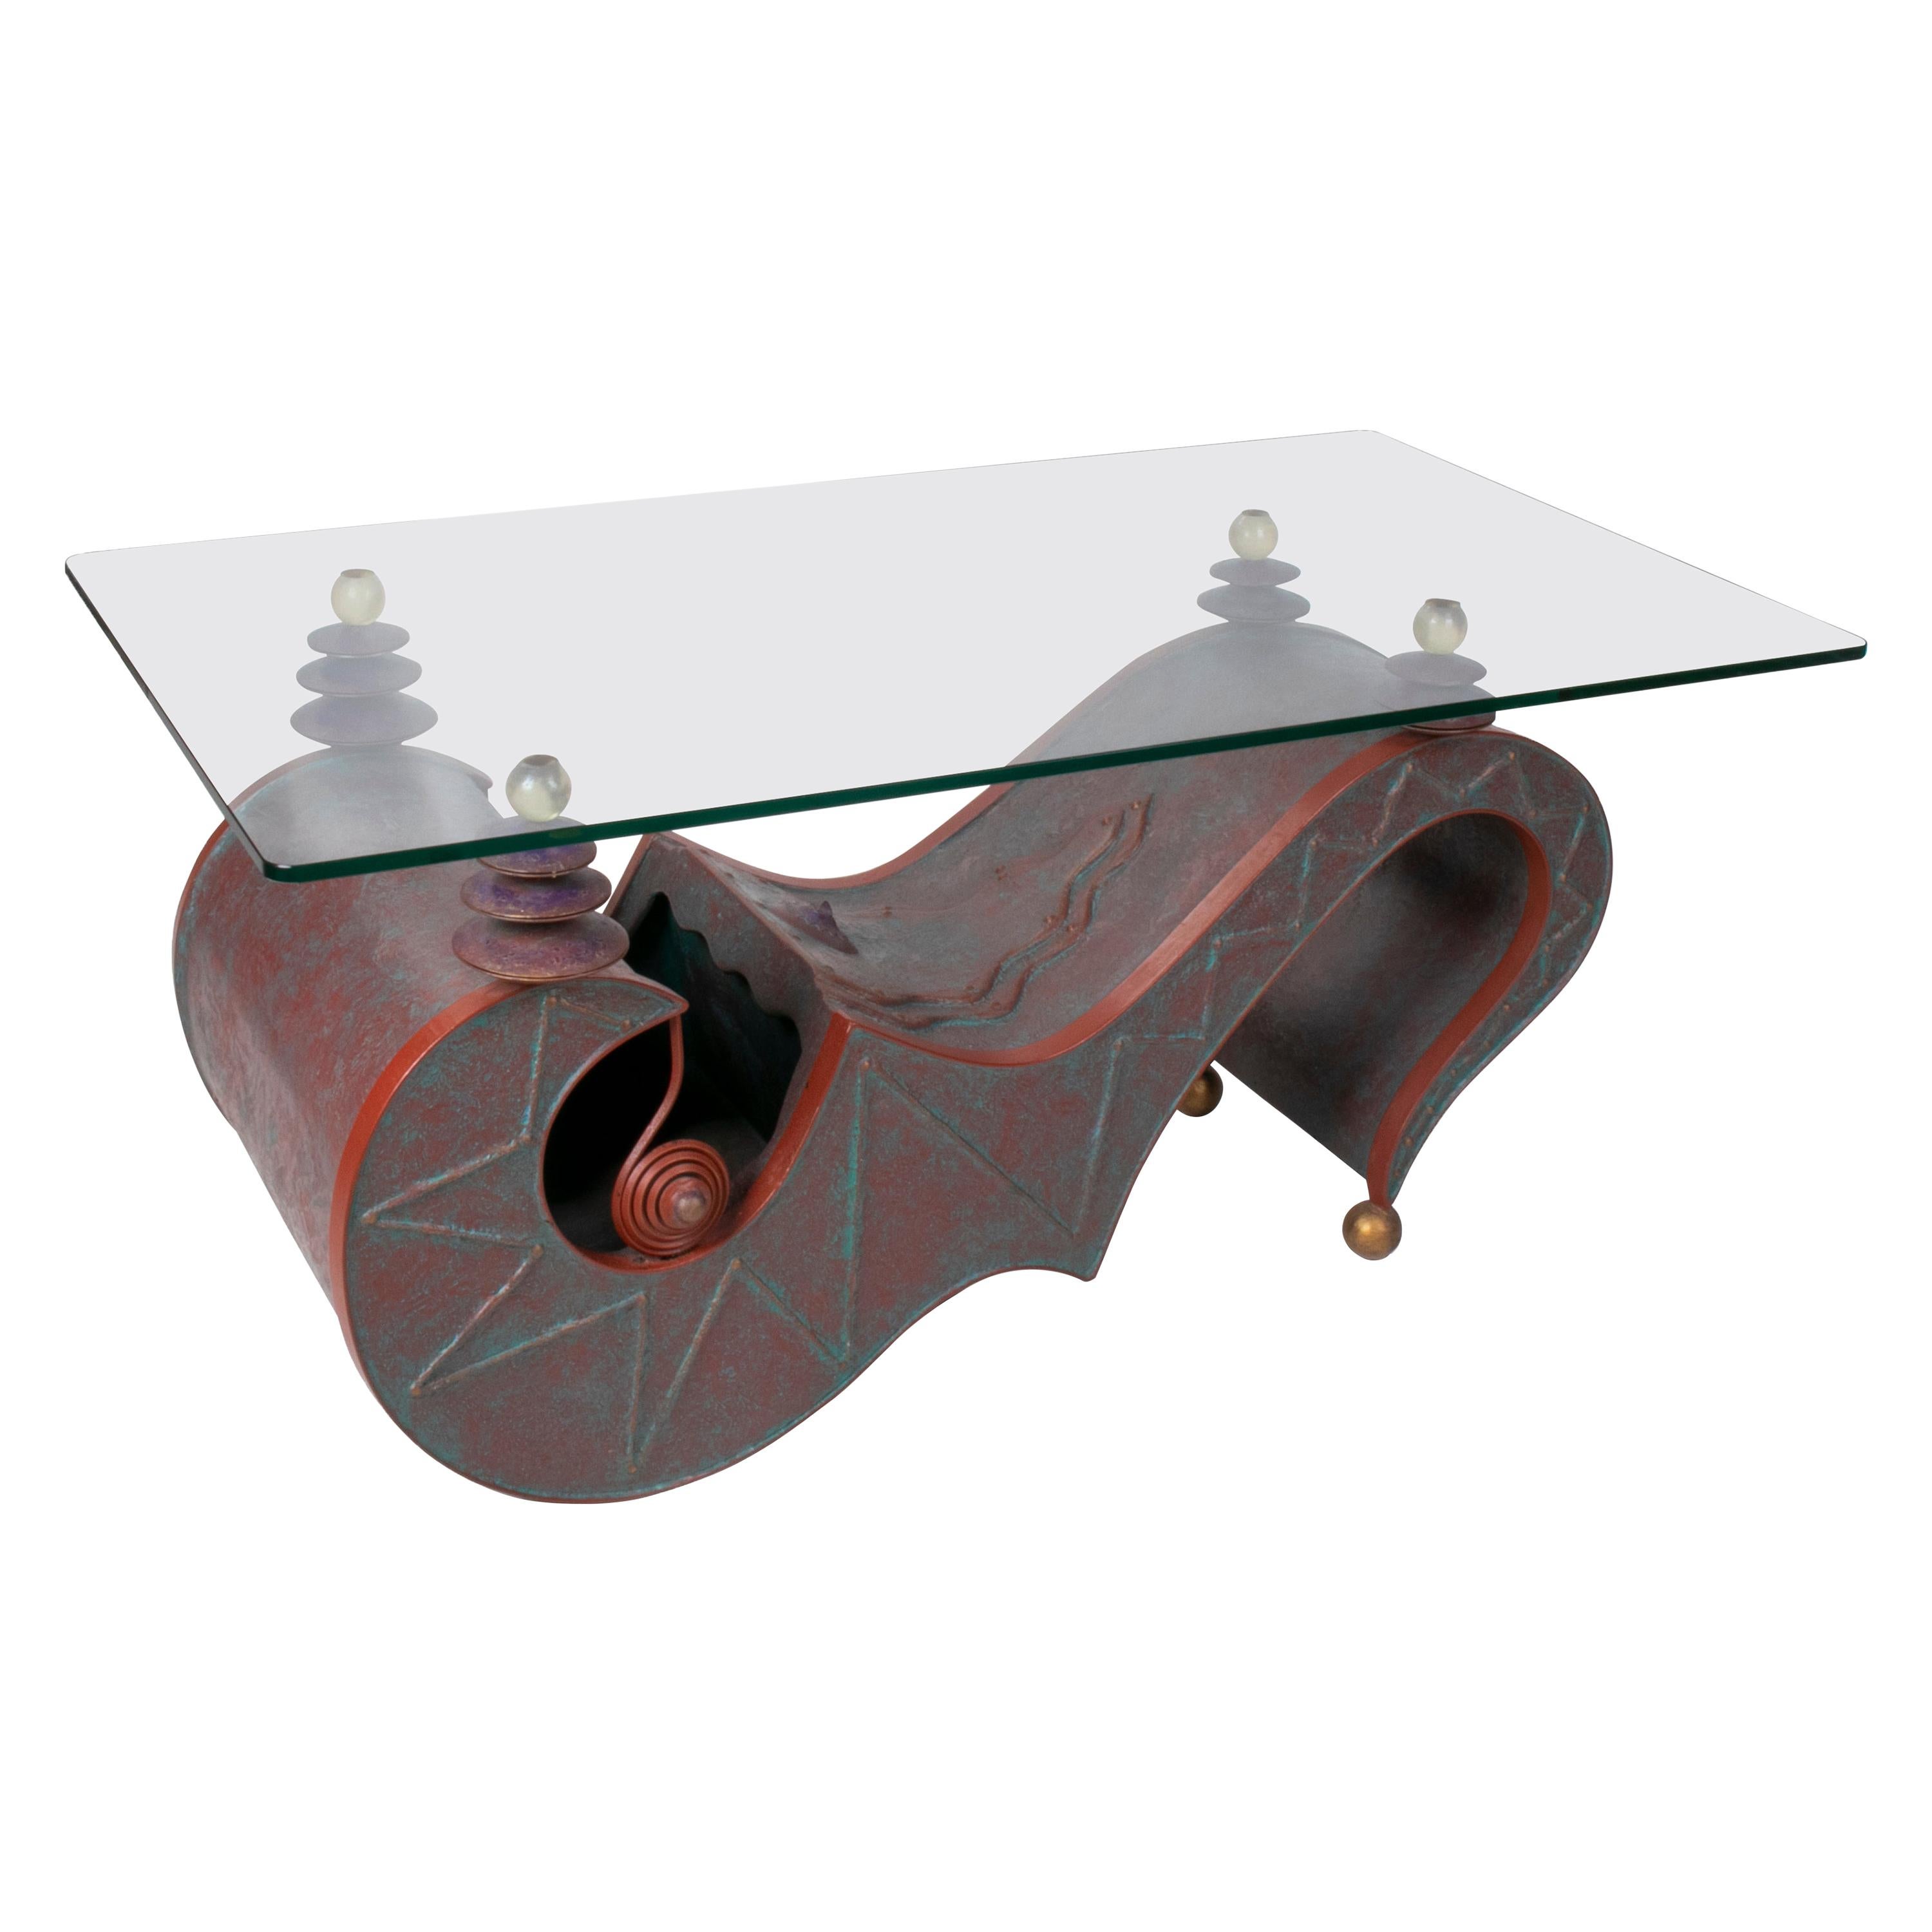 1980s German Abstract Design Iron and Glass Coffee Table